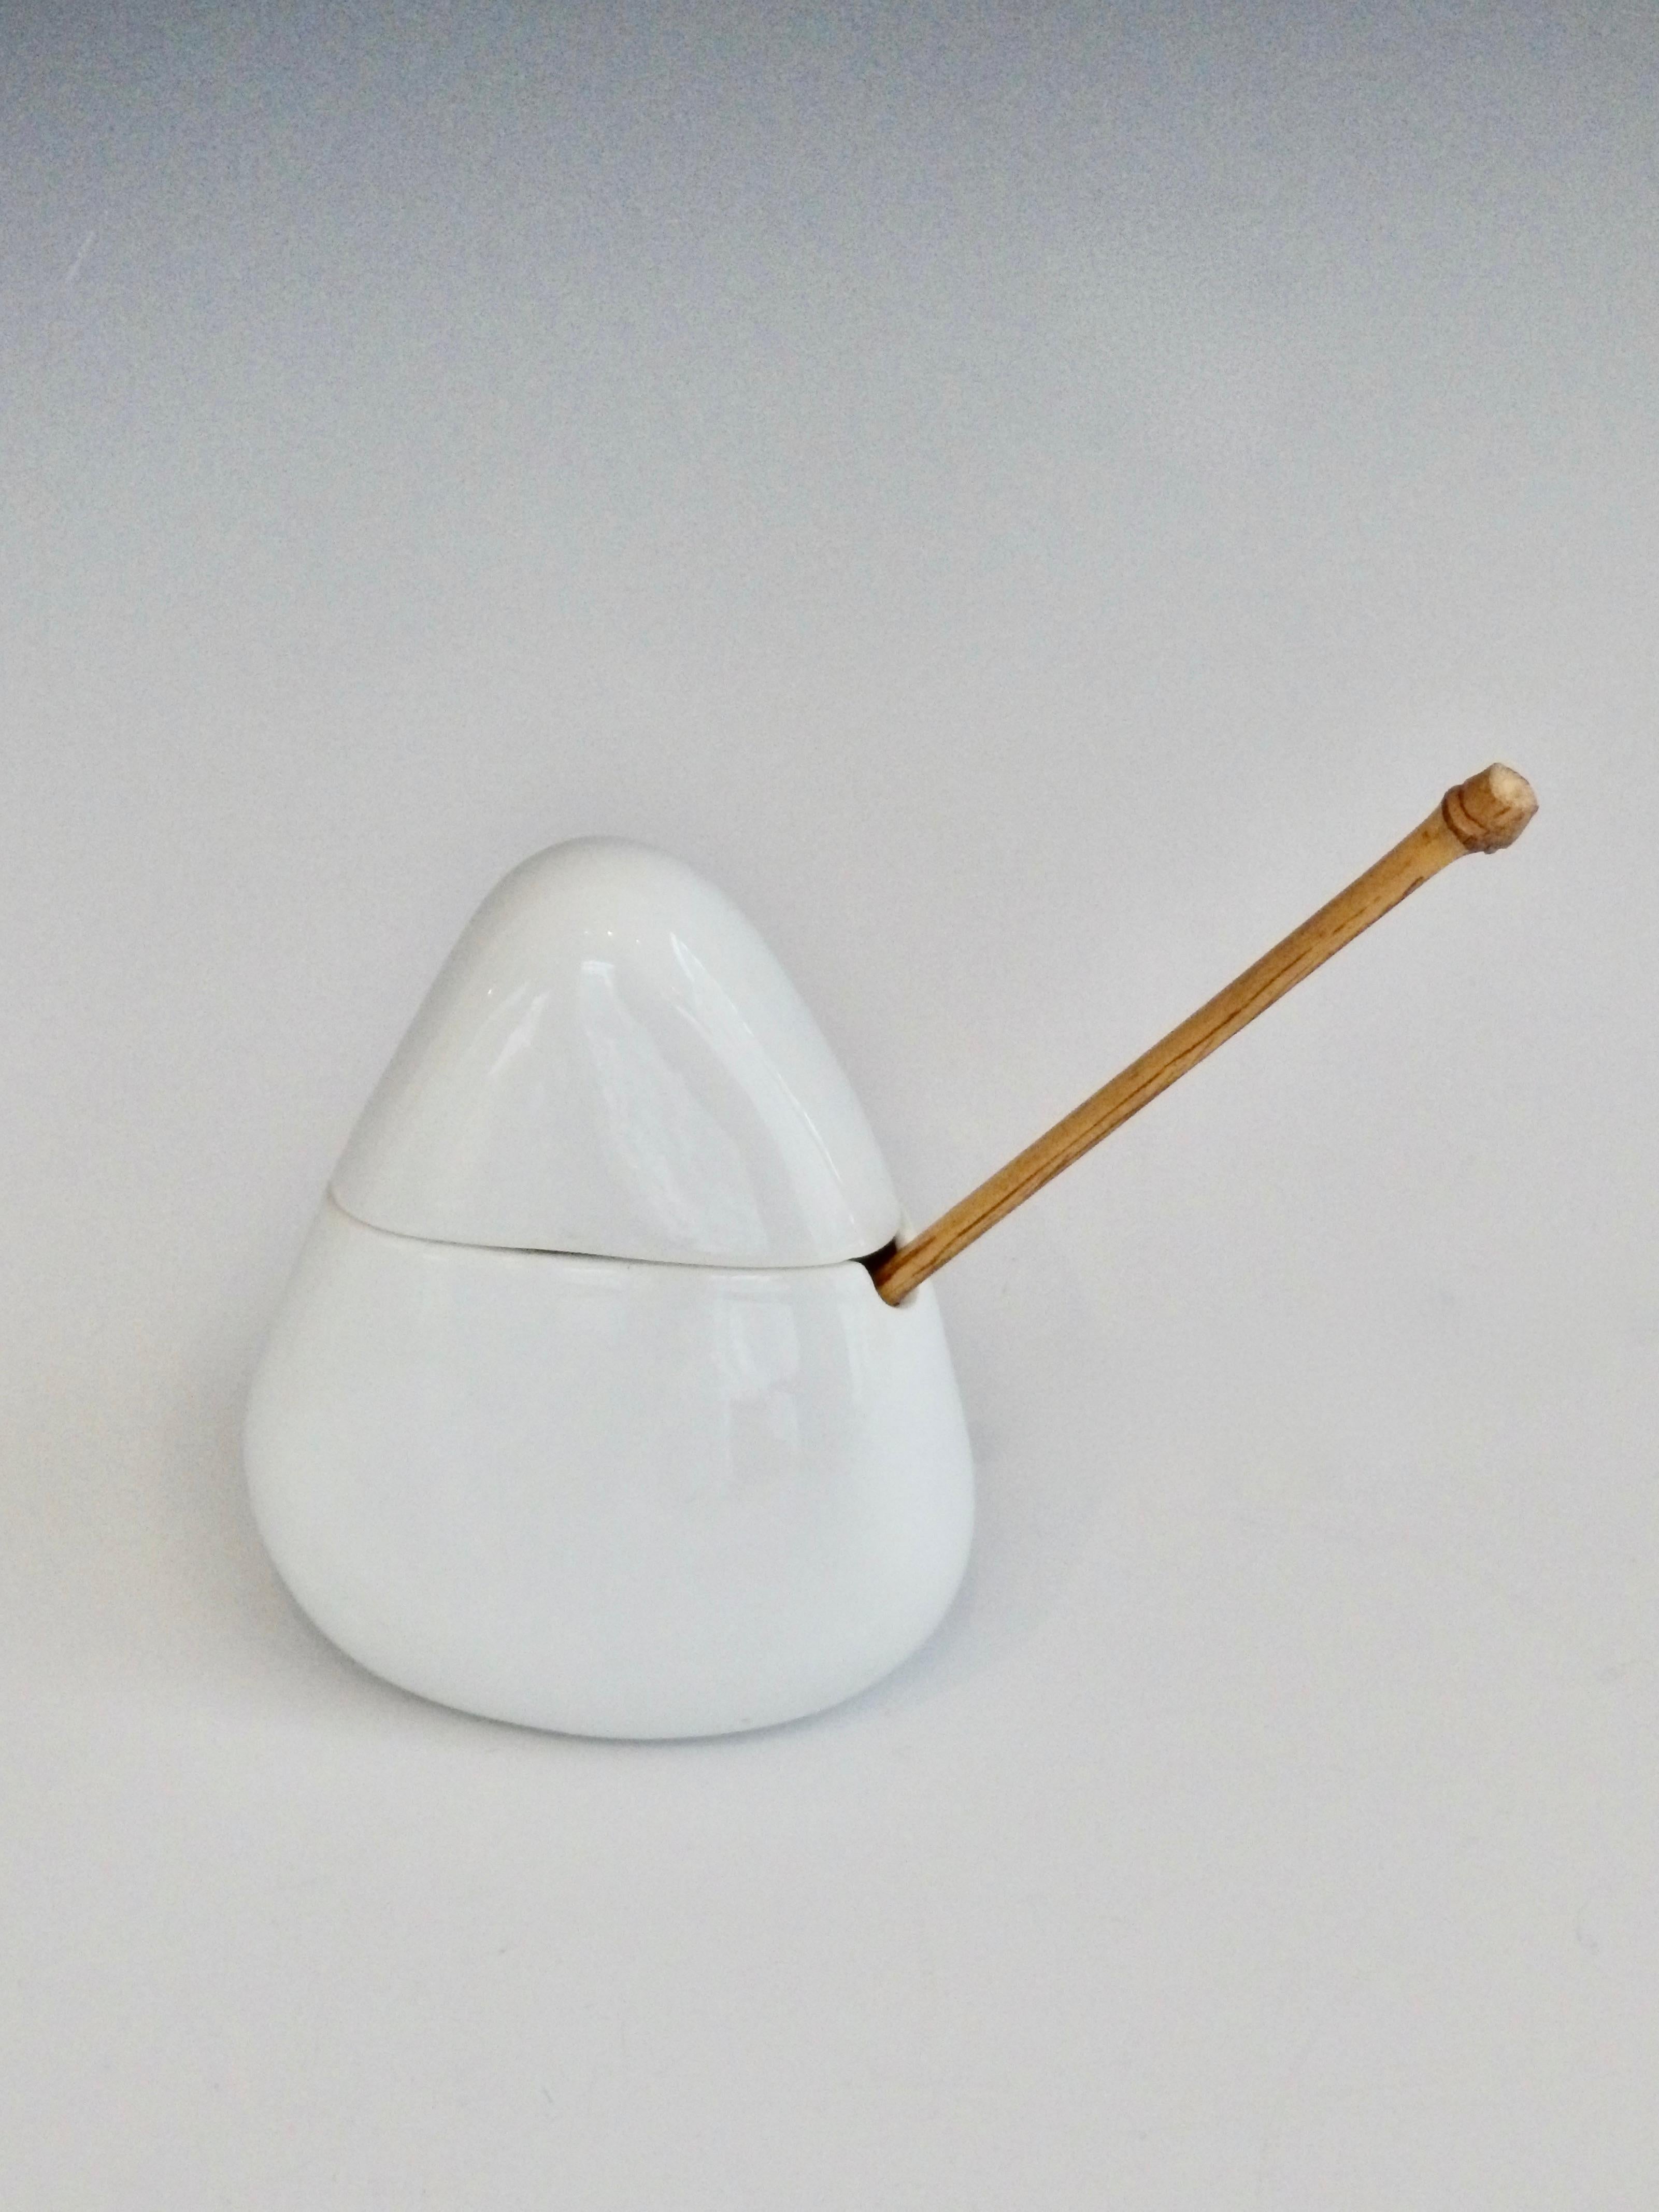 Organic modern white porcelain sugar bowl in biomorphic shape with bamboo handle spoon. Designed by Kenji Fujita proyege afo Lagardo Tackett. Produced by Freeman Lederman. Nice rare complete package. Spoon is 9.75